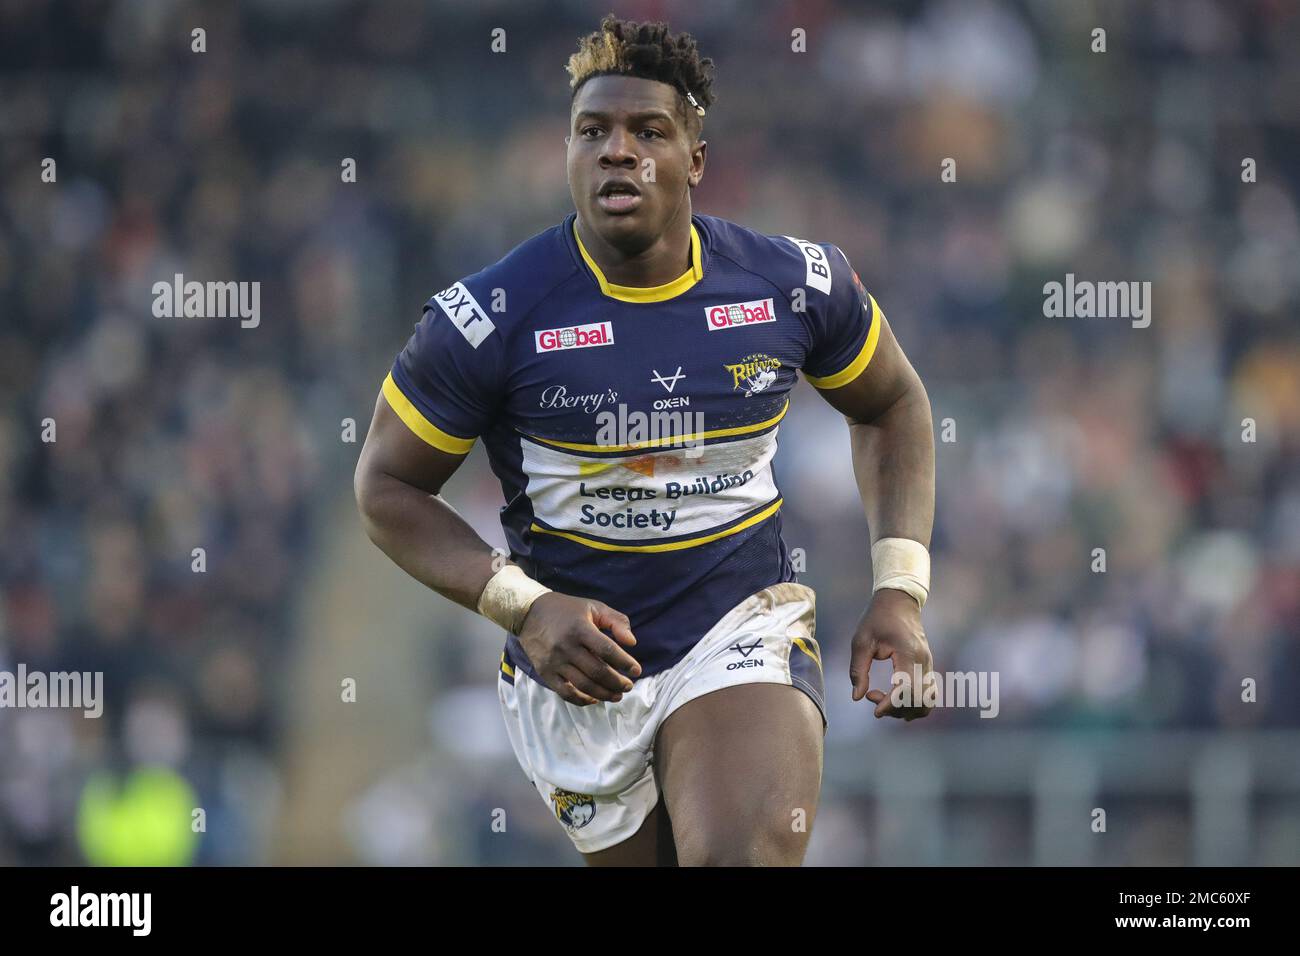 Justin Sangare #17 of Leeds Rhinos during the Rugby League Pre Season match  Leigh Centurions vs Leeds Rhinos at Leigh Sports Village, Leigh, United  Kingdom, 21st January 2023 (Photo by James Heaton/News